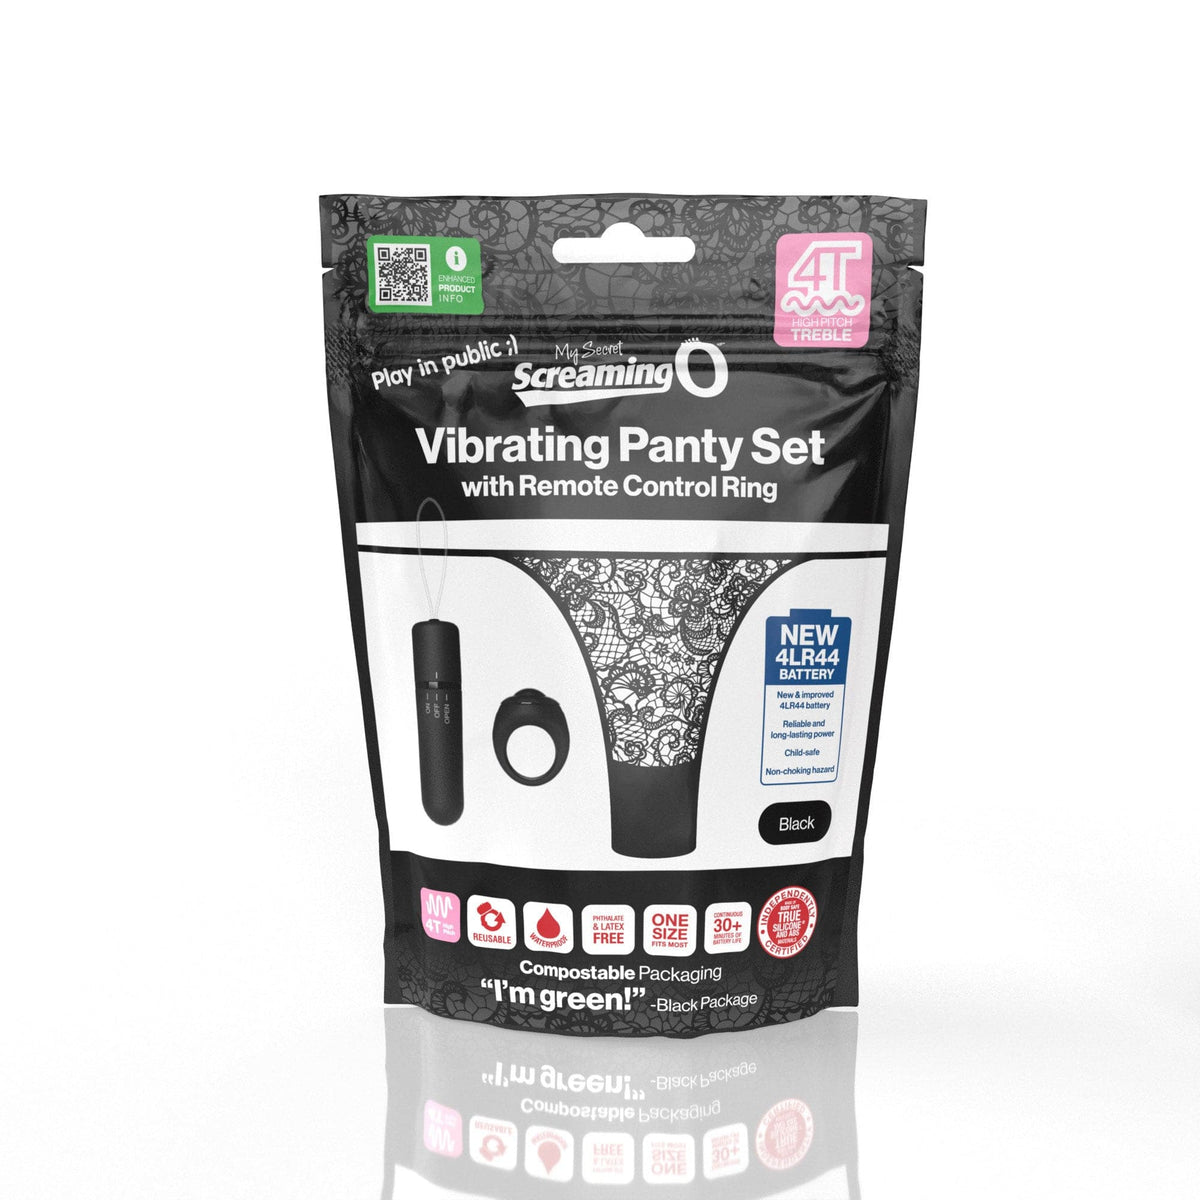 screaming o 4t vibrating panty set with remote control ring black